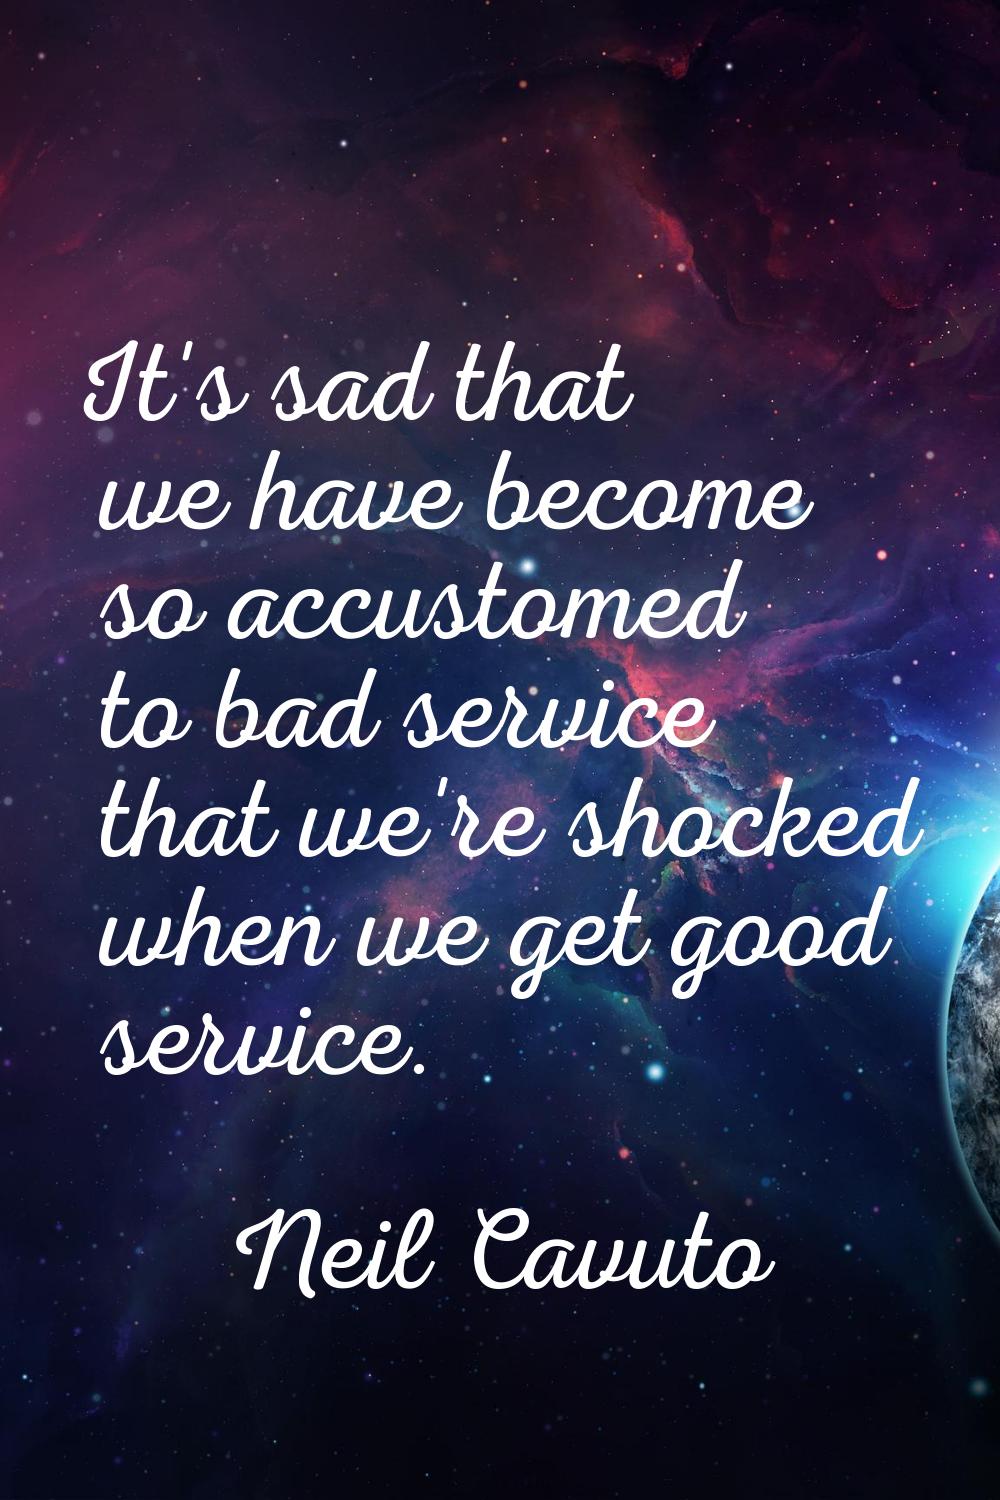 It's sad that we have become so accustomed to bad service that we're shocked when we get good servi